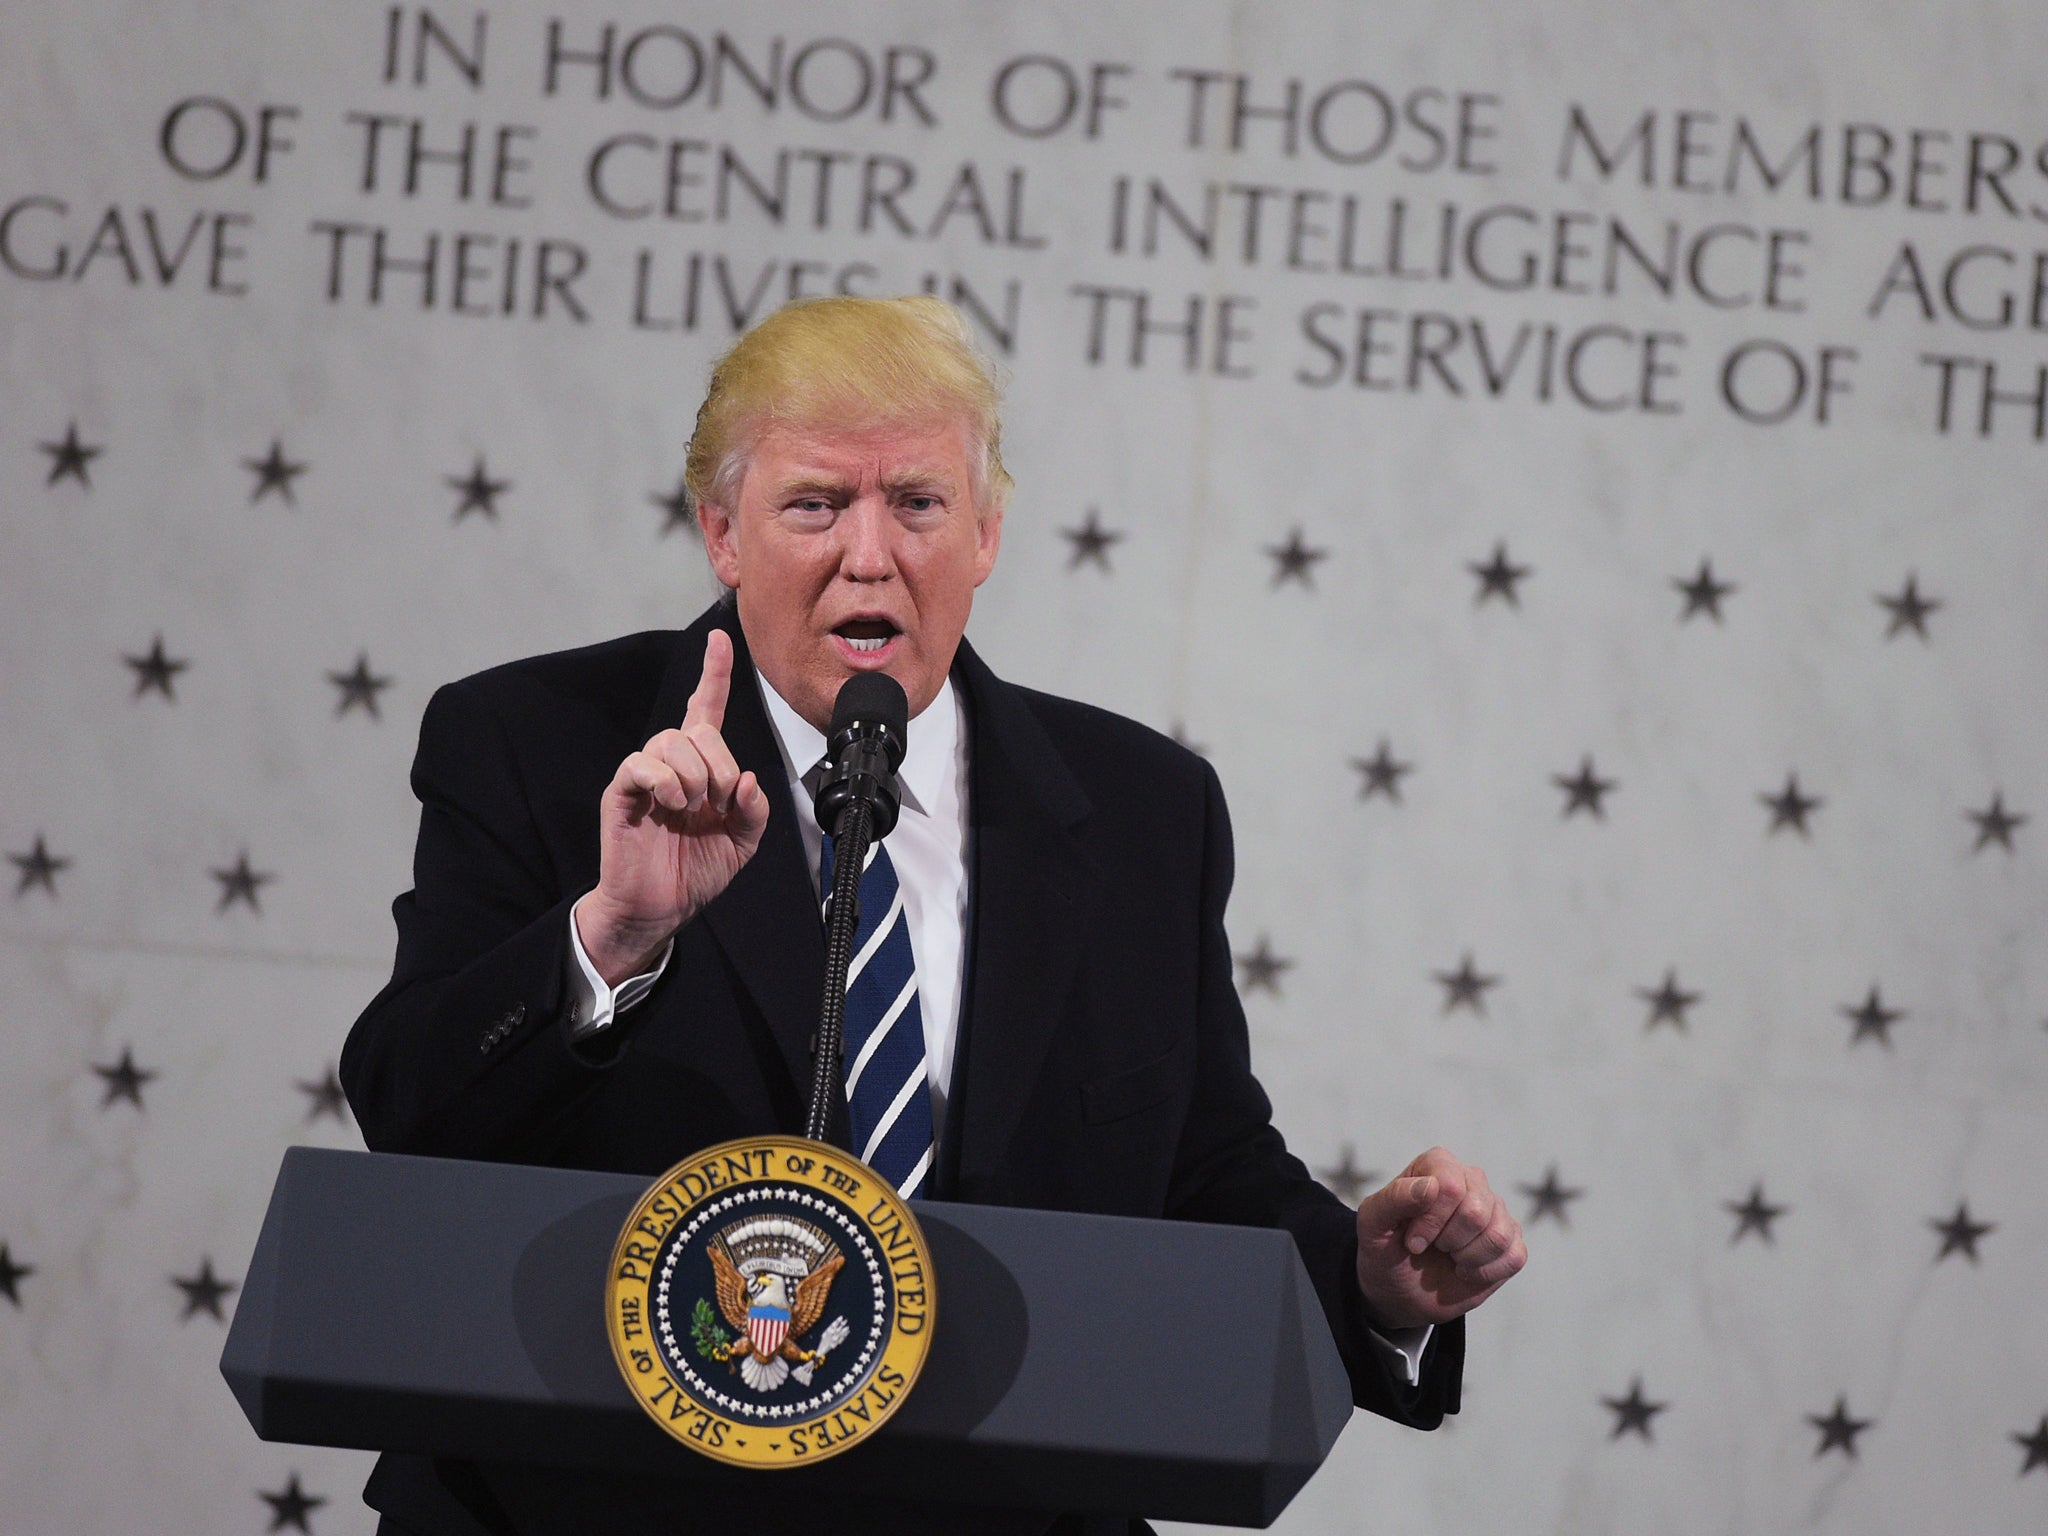 President Trump during a visit to the Central Intelligence Agency in Langley, Virginia